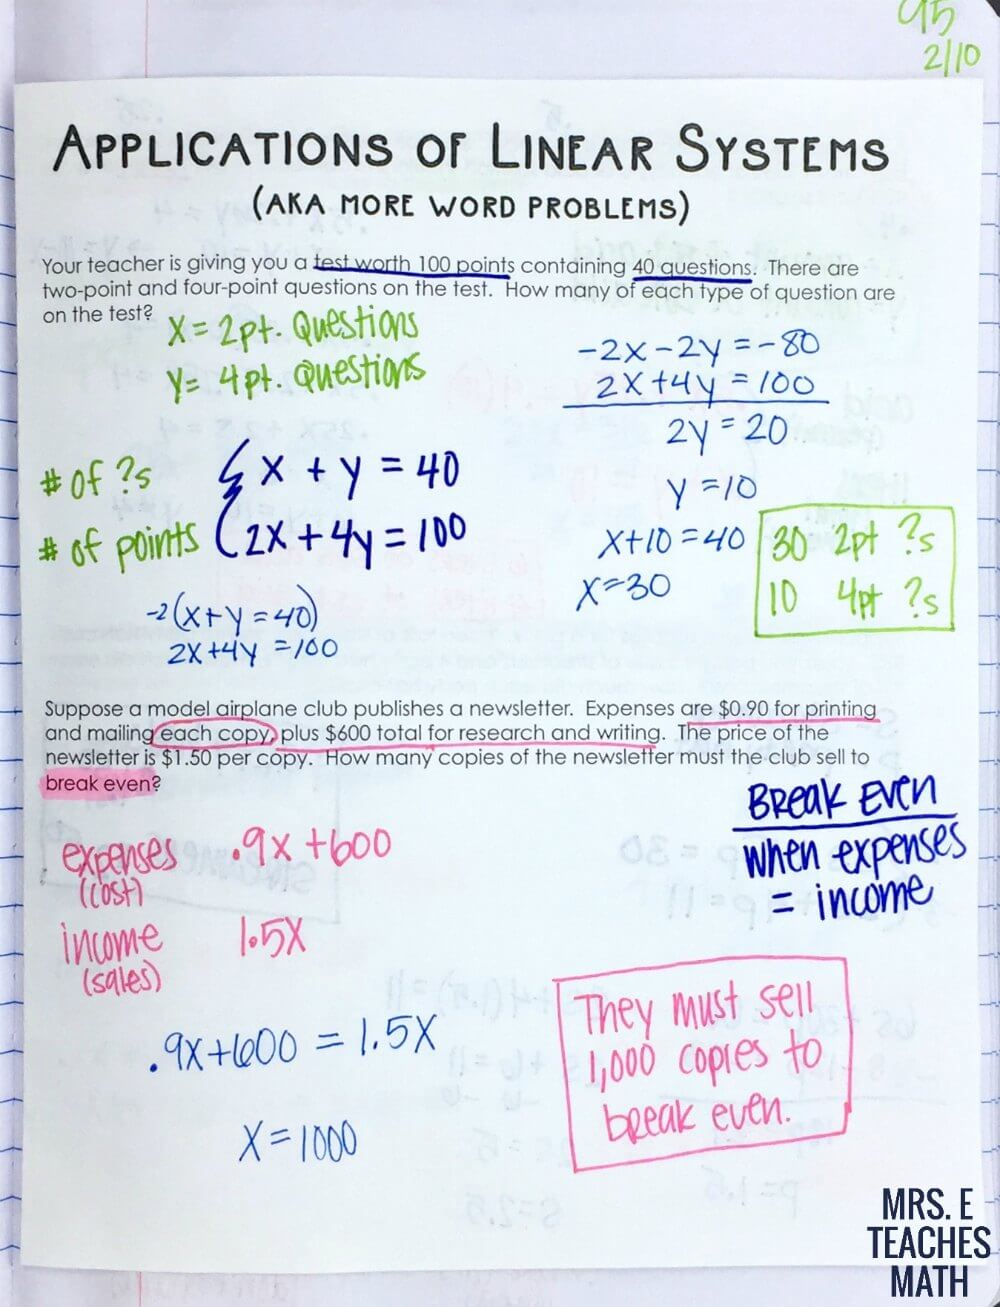 Systems of Linear Equations Word Problems INB Page  Mrs. E